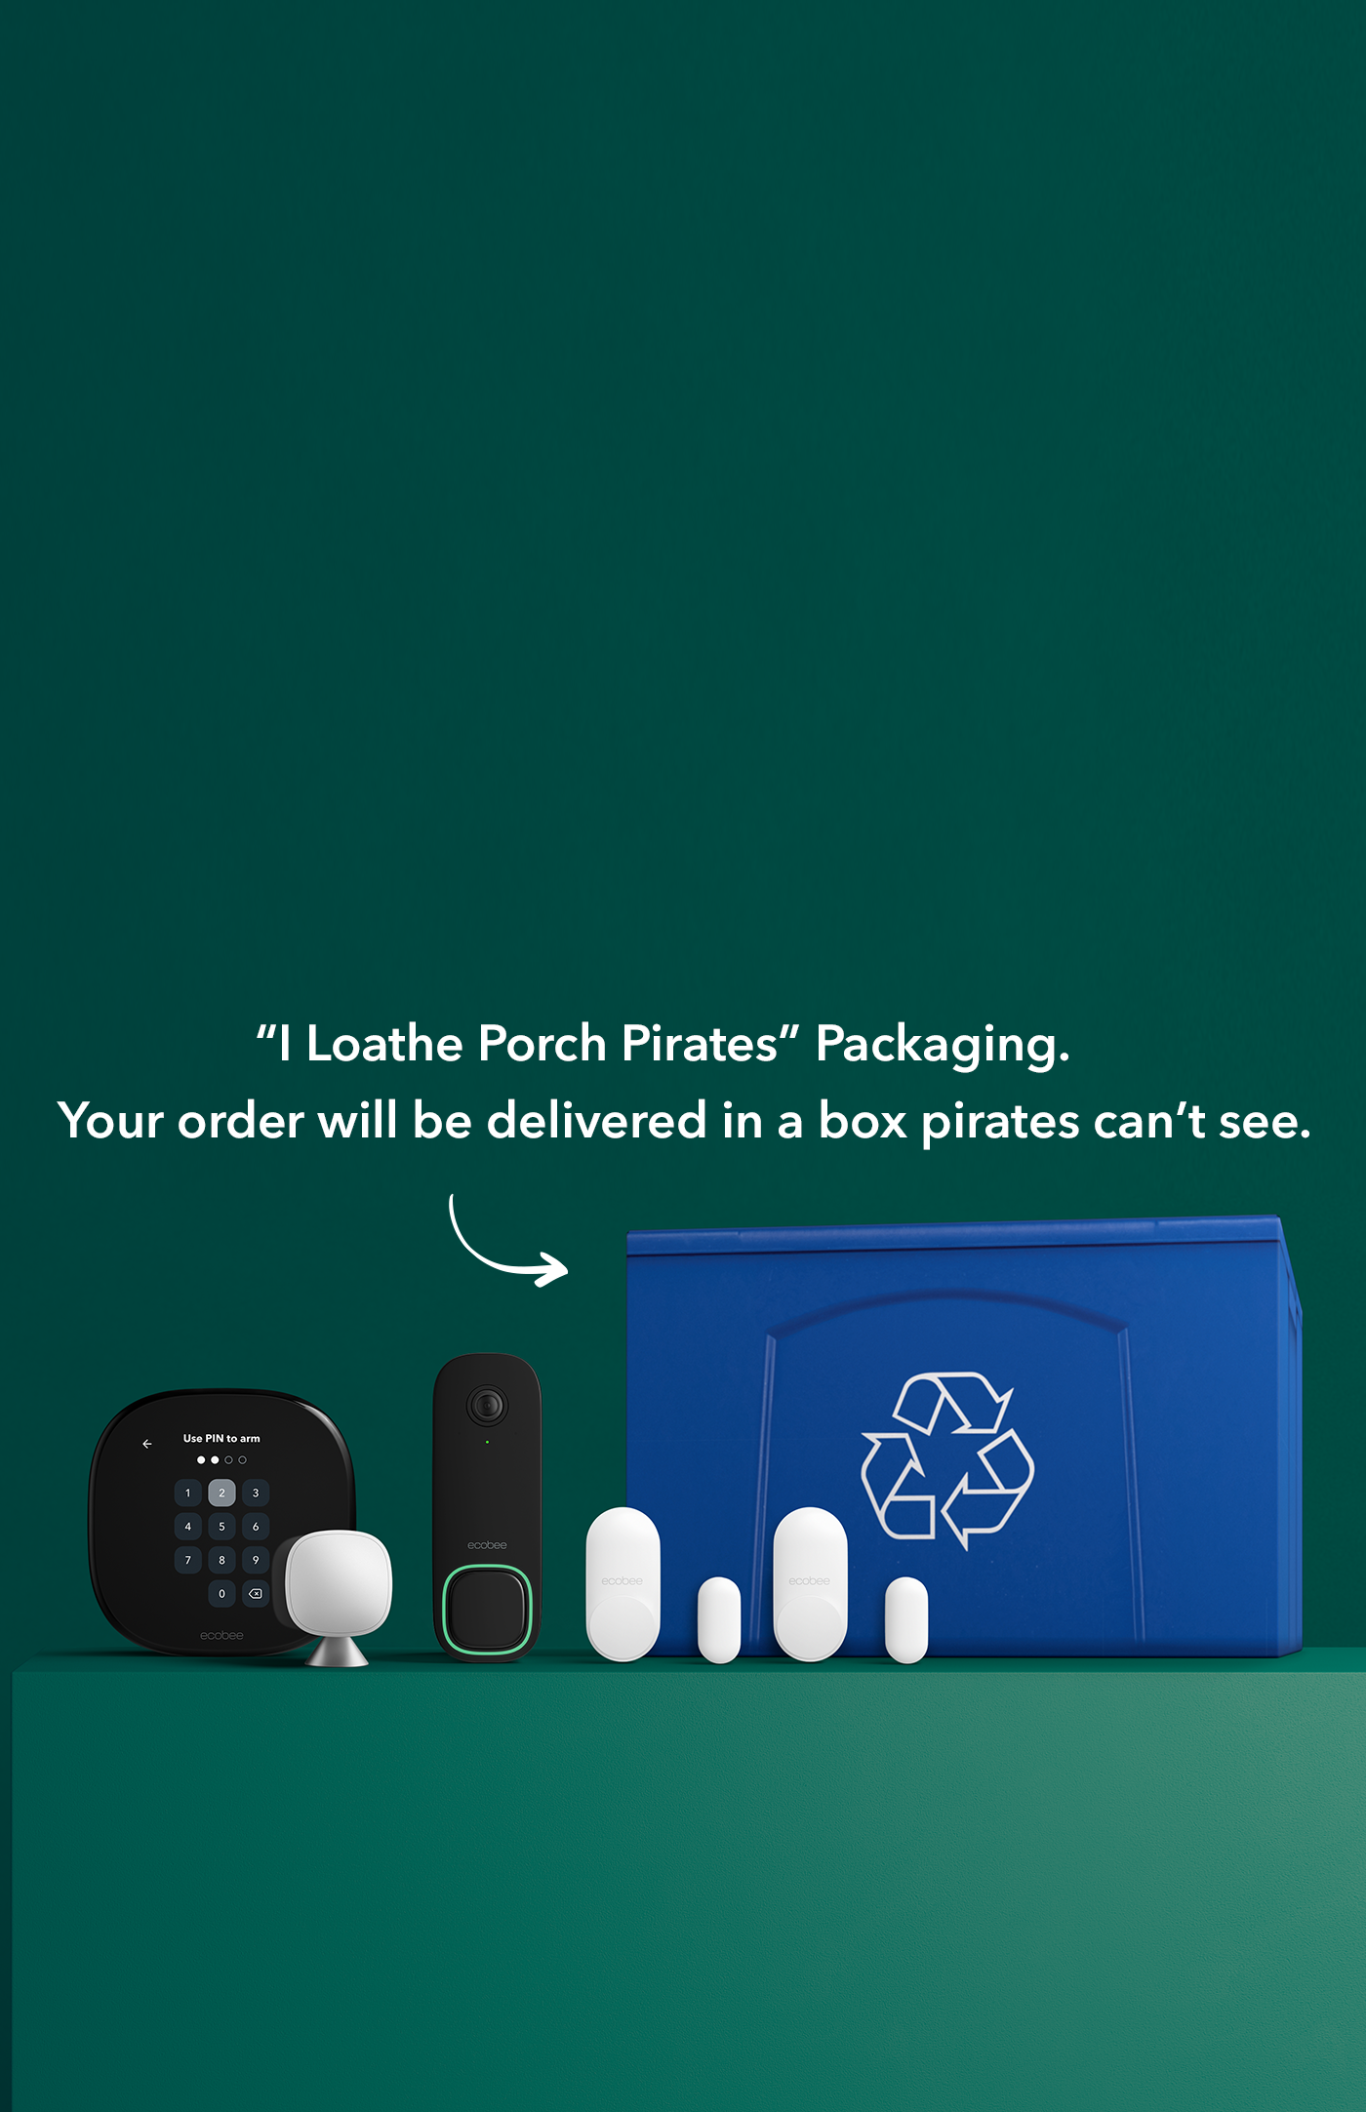 Thermostat, doorbell camera, room sensor, and two contact sensors. Packaging looks like recycling. The words “I Loathe Porch Pirates Packaging” and an arrow pointing to the box followed by “Your order will be delivered in a box pirates can’t see.” 